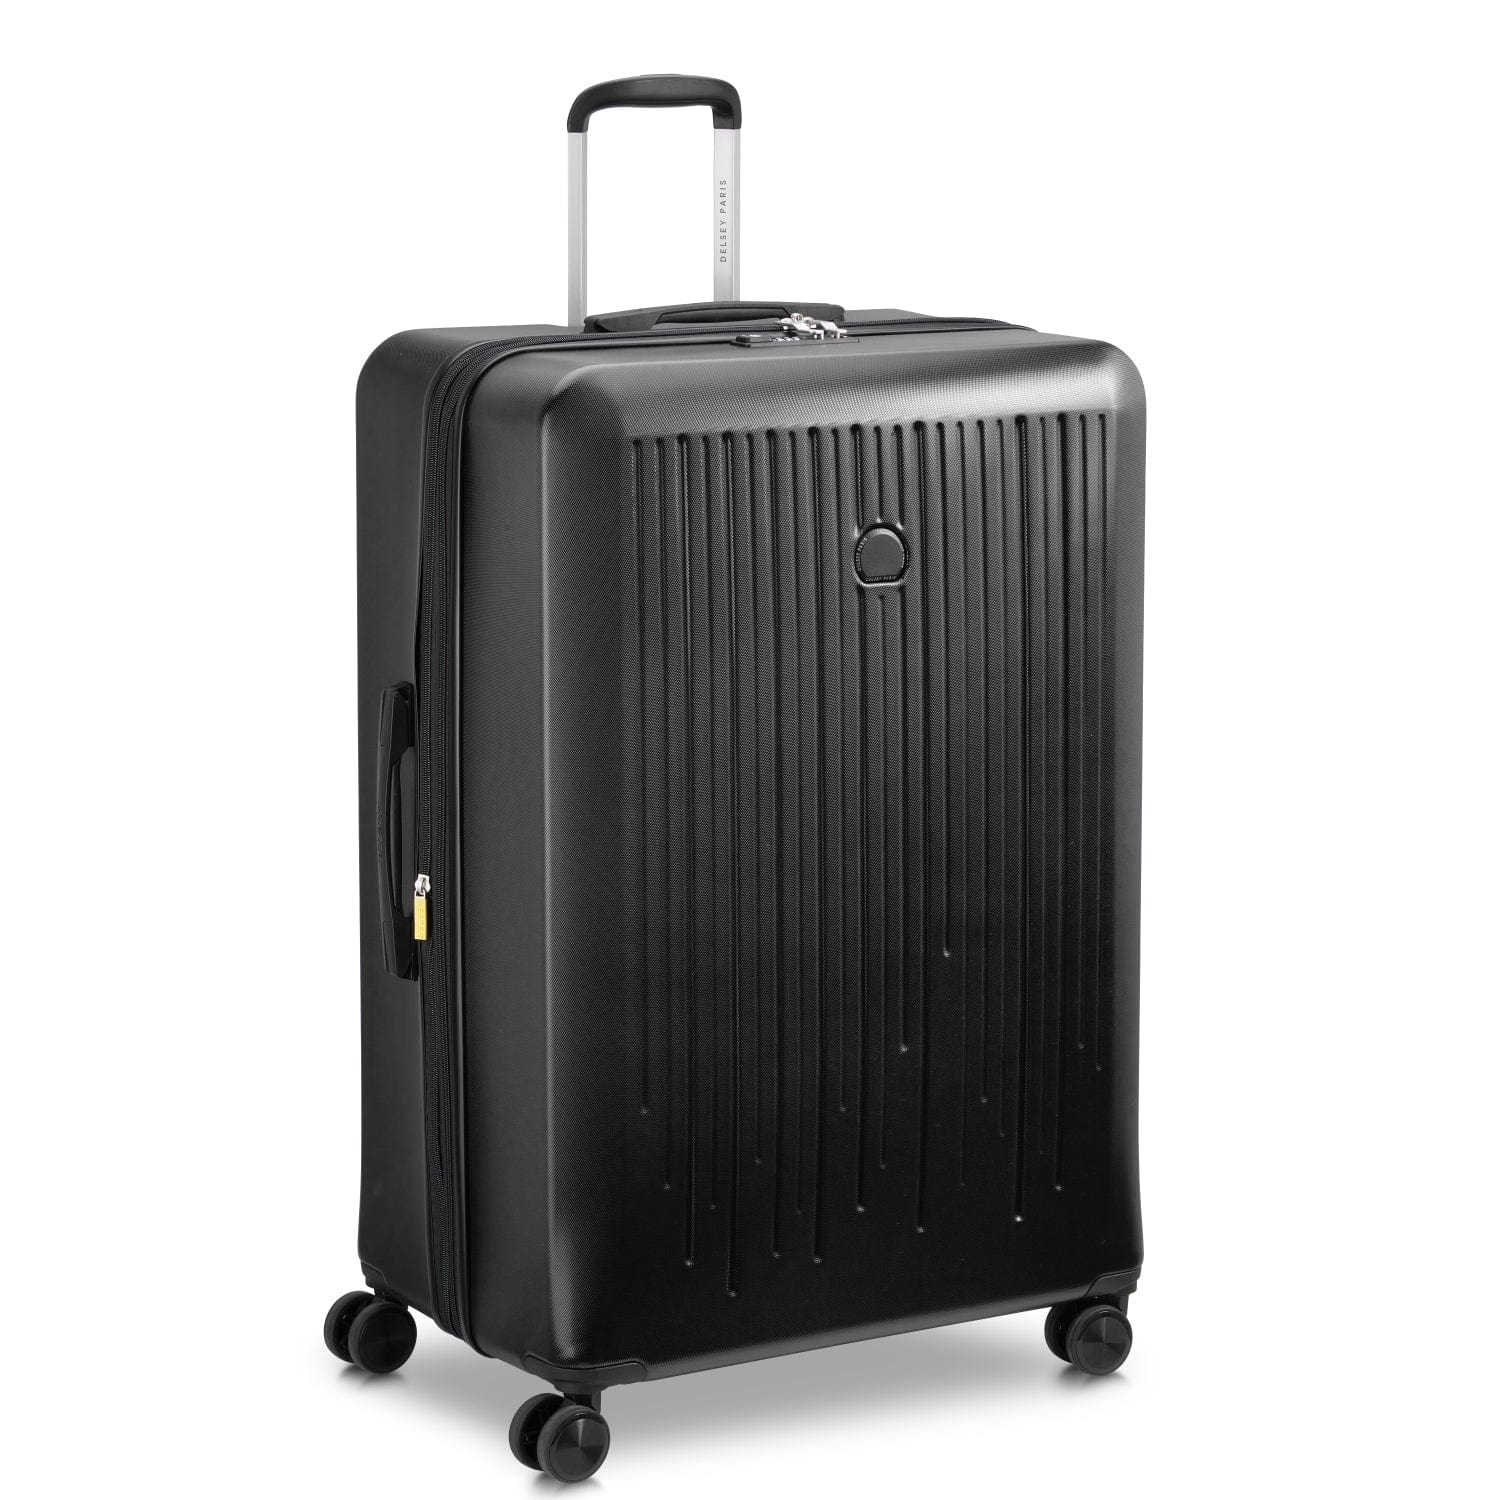 Delsey Christine 55+82cm Hardcase 4 Double Wheel Expandable Cabin & Check-In Luggage Trolley Set Klein Black + FREE Delsey Agreable Backpack